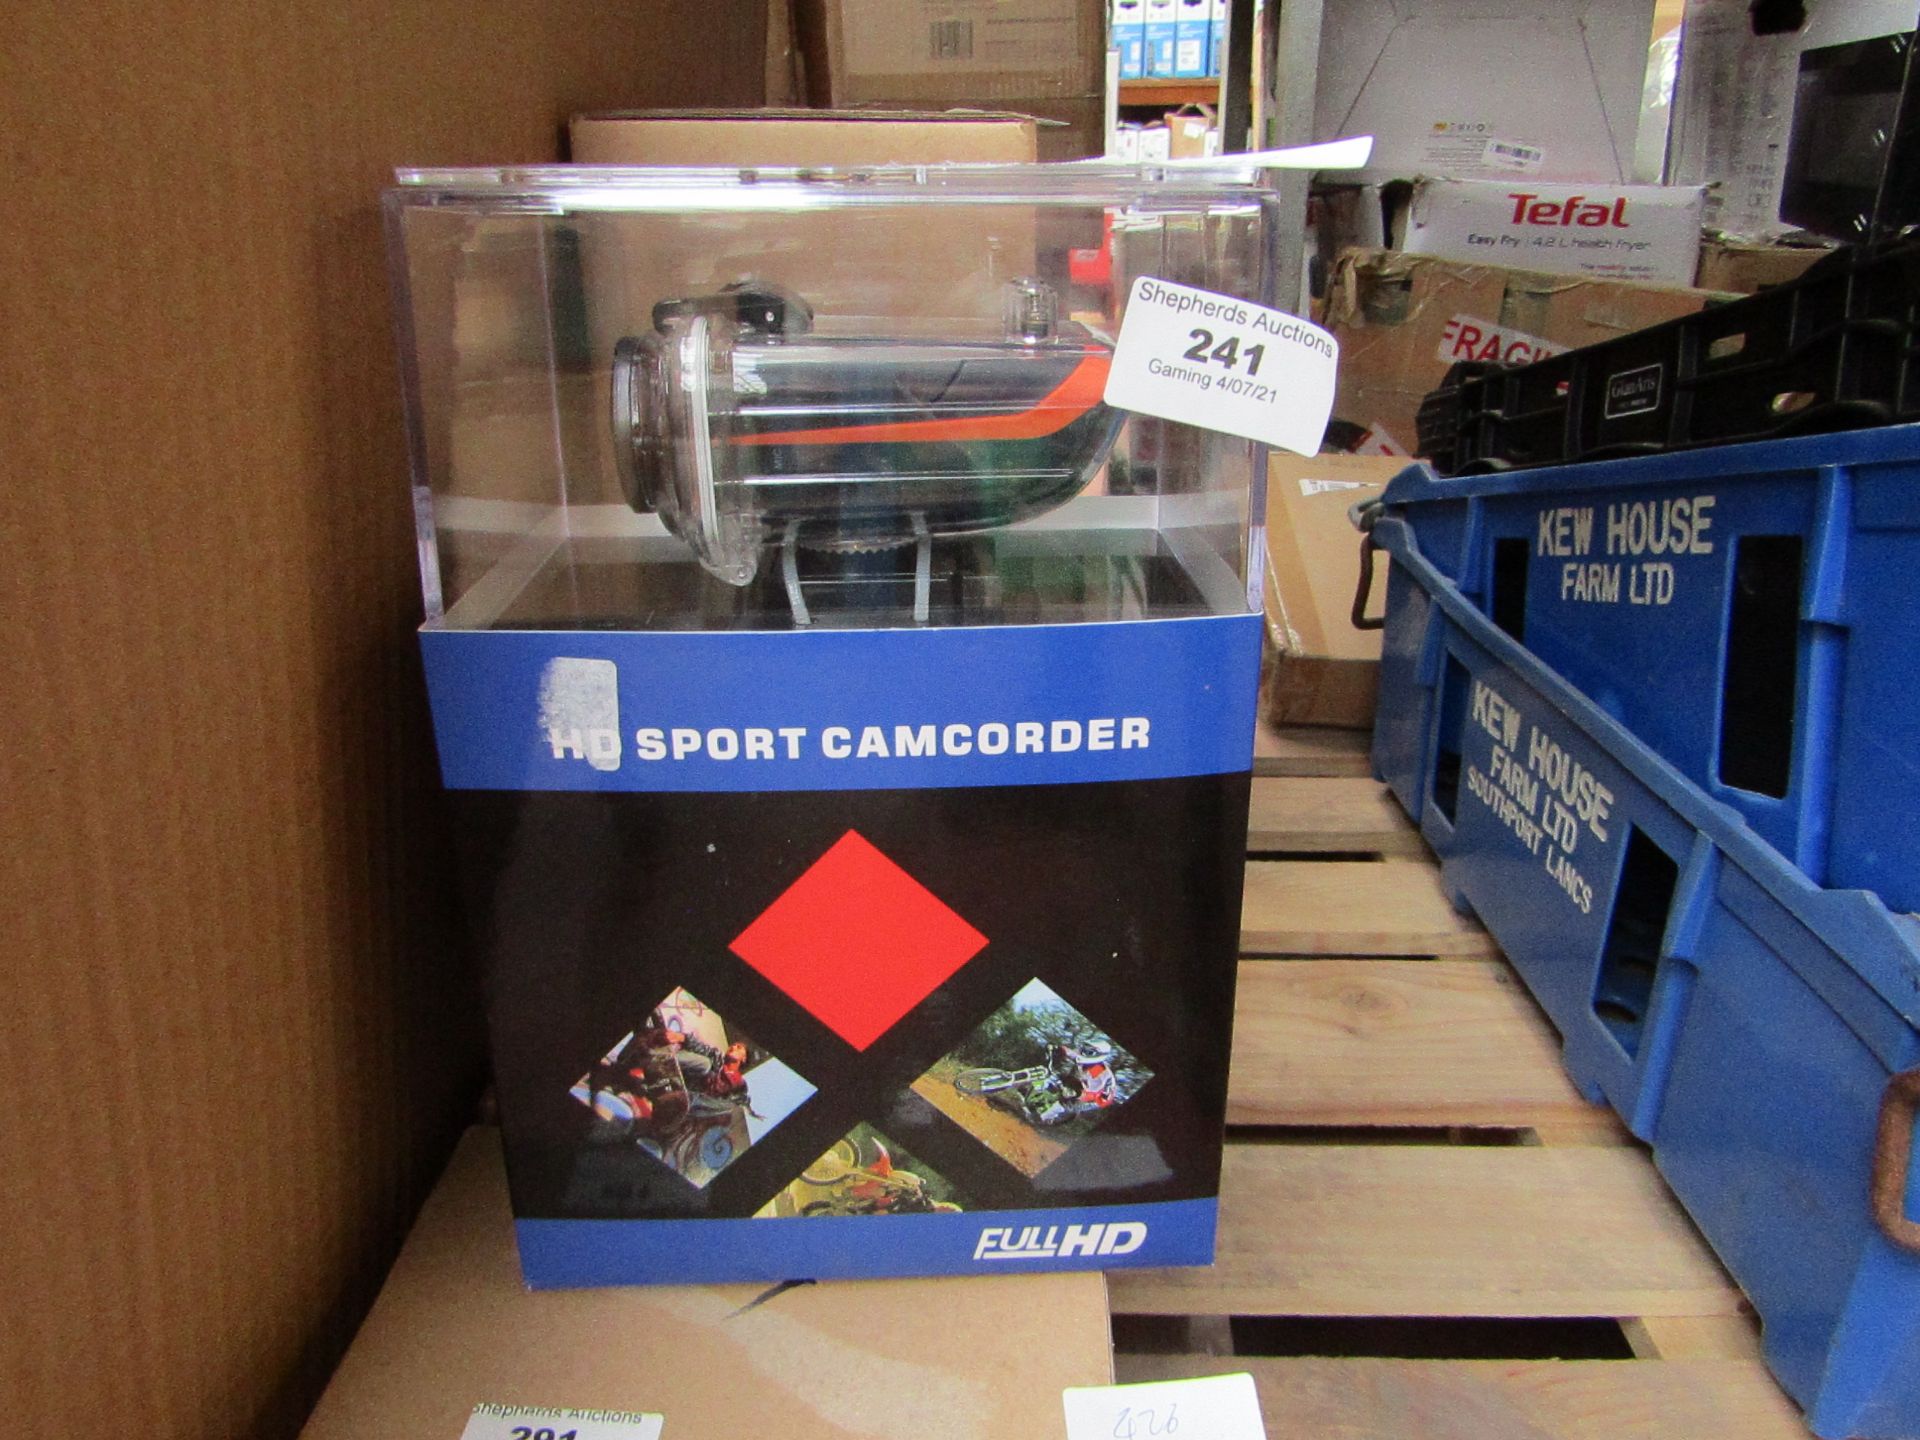 HD - Sport Camcorded (Full HD) - Untested & Boxed.